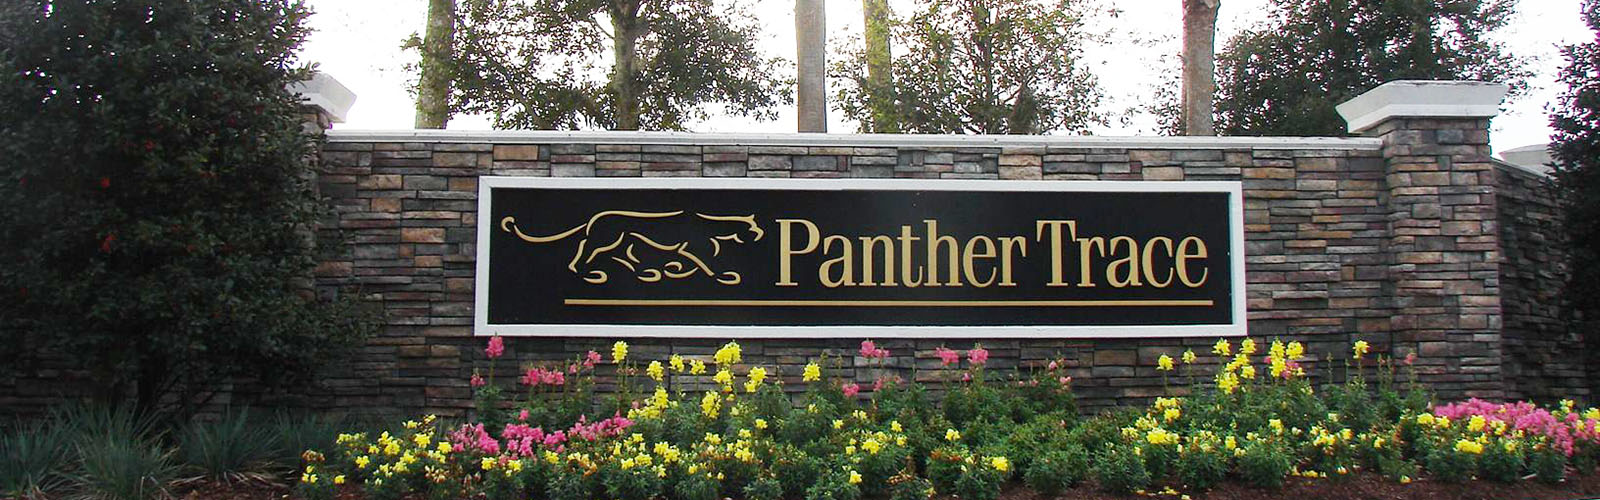 Panther Trace